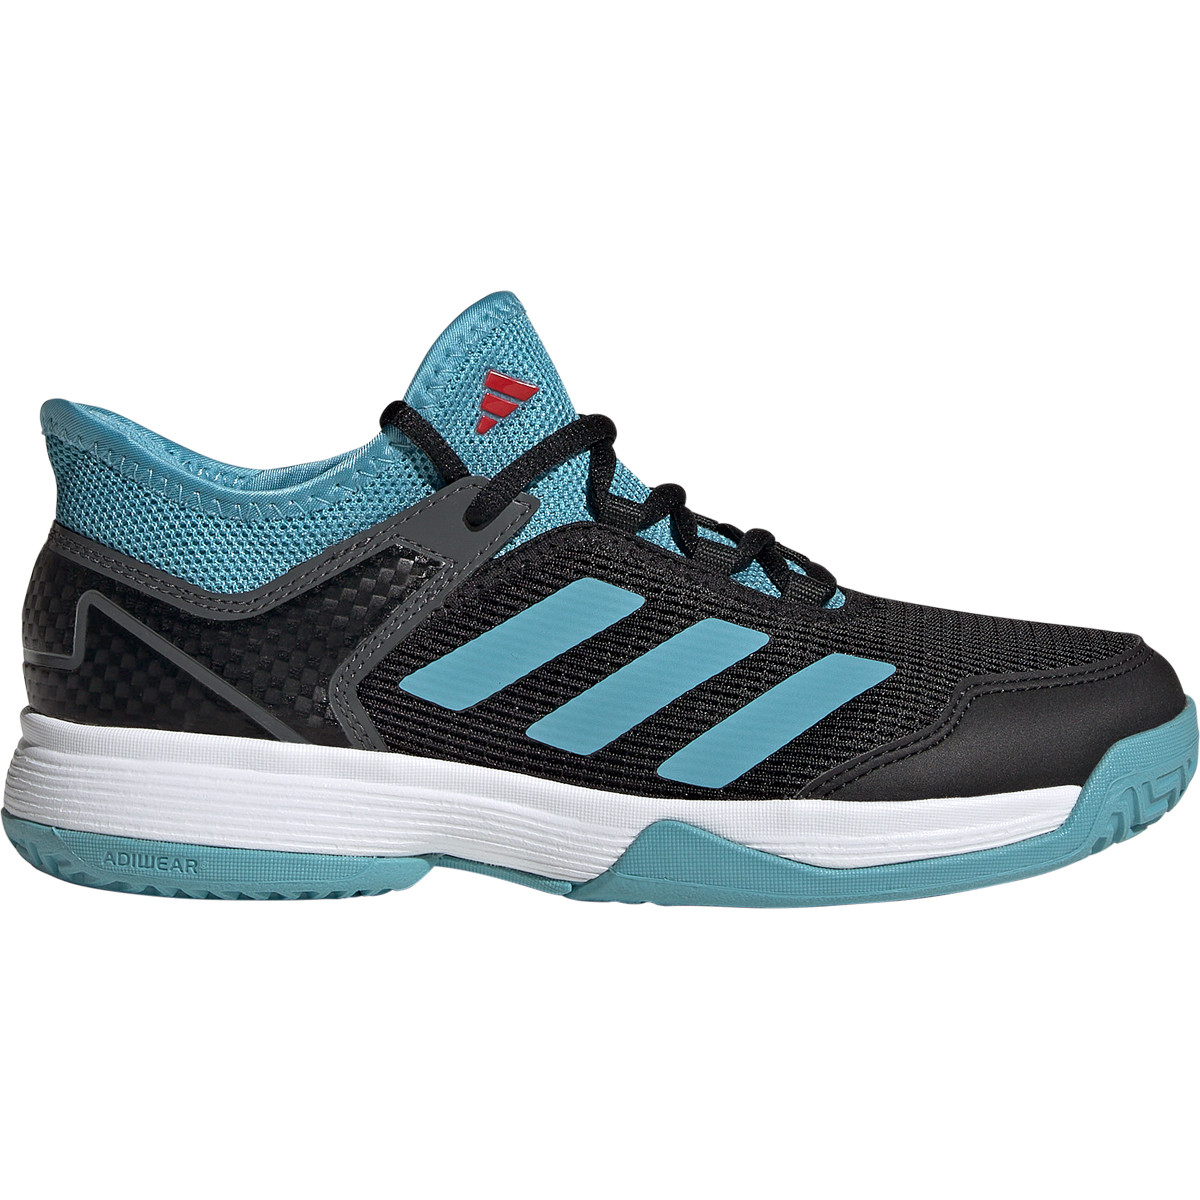 JUNIOR ADIDAS UBERSONIC K ALL COURT SHOES